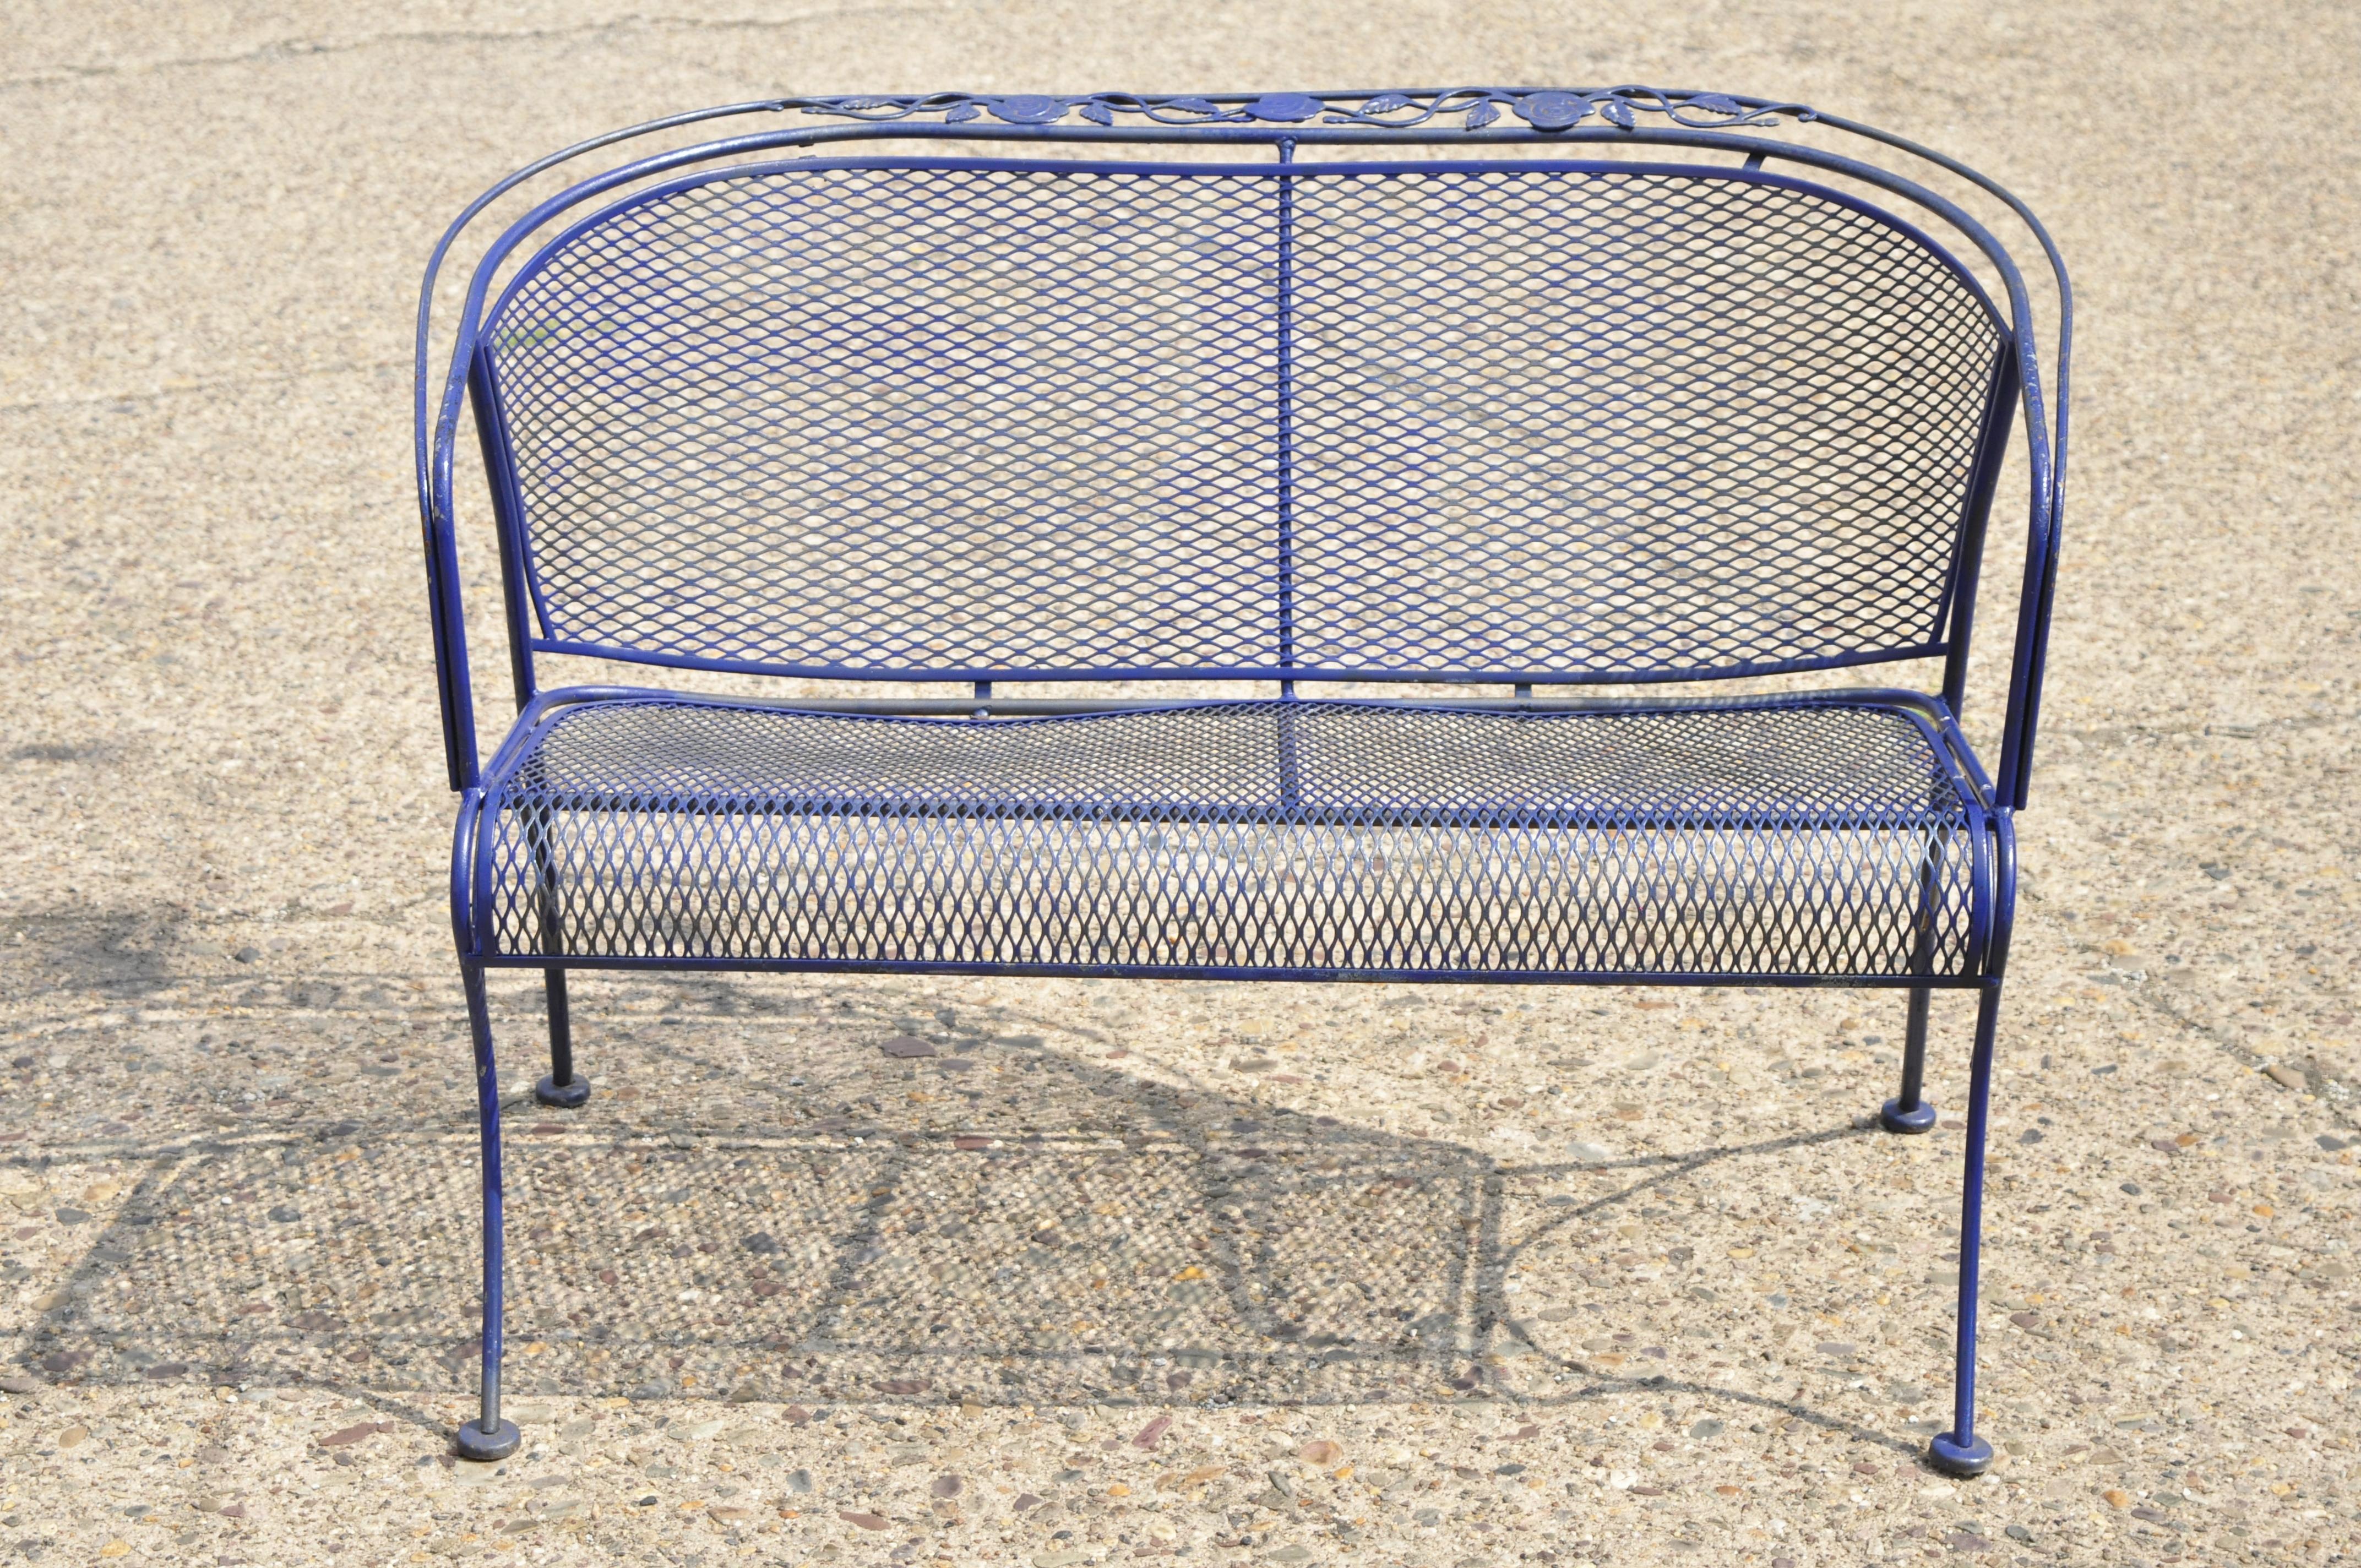 Vintage Woodard blue barrel back wrought iron rose pattern garden patio bench. Item features mesh back and seat, wrought iron construction, quality American craftsmanship, great style and form, circa mid-late 20th century. Measurements: 30